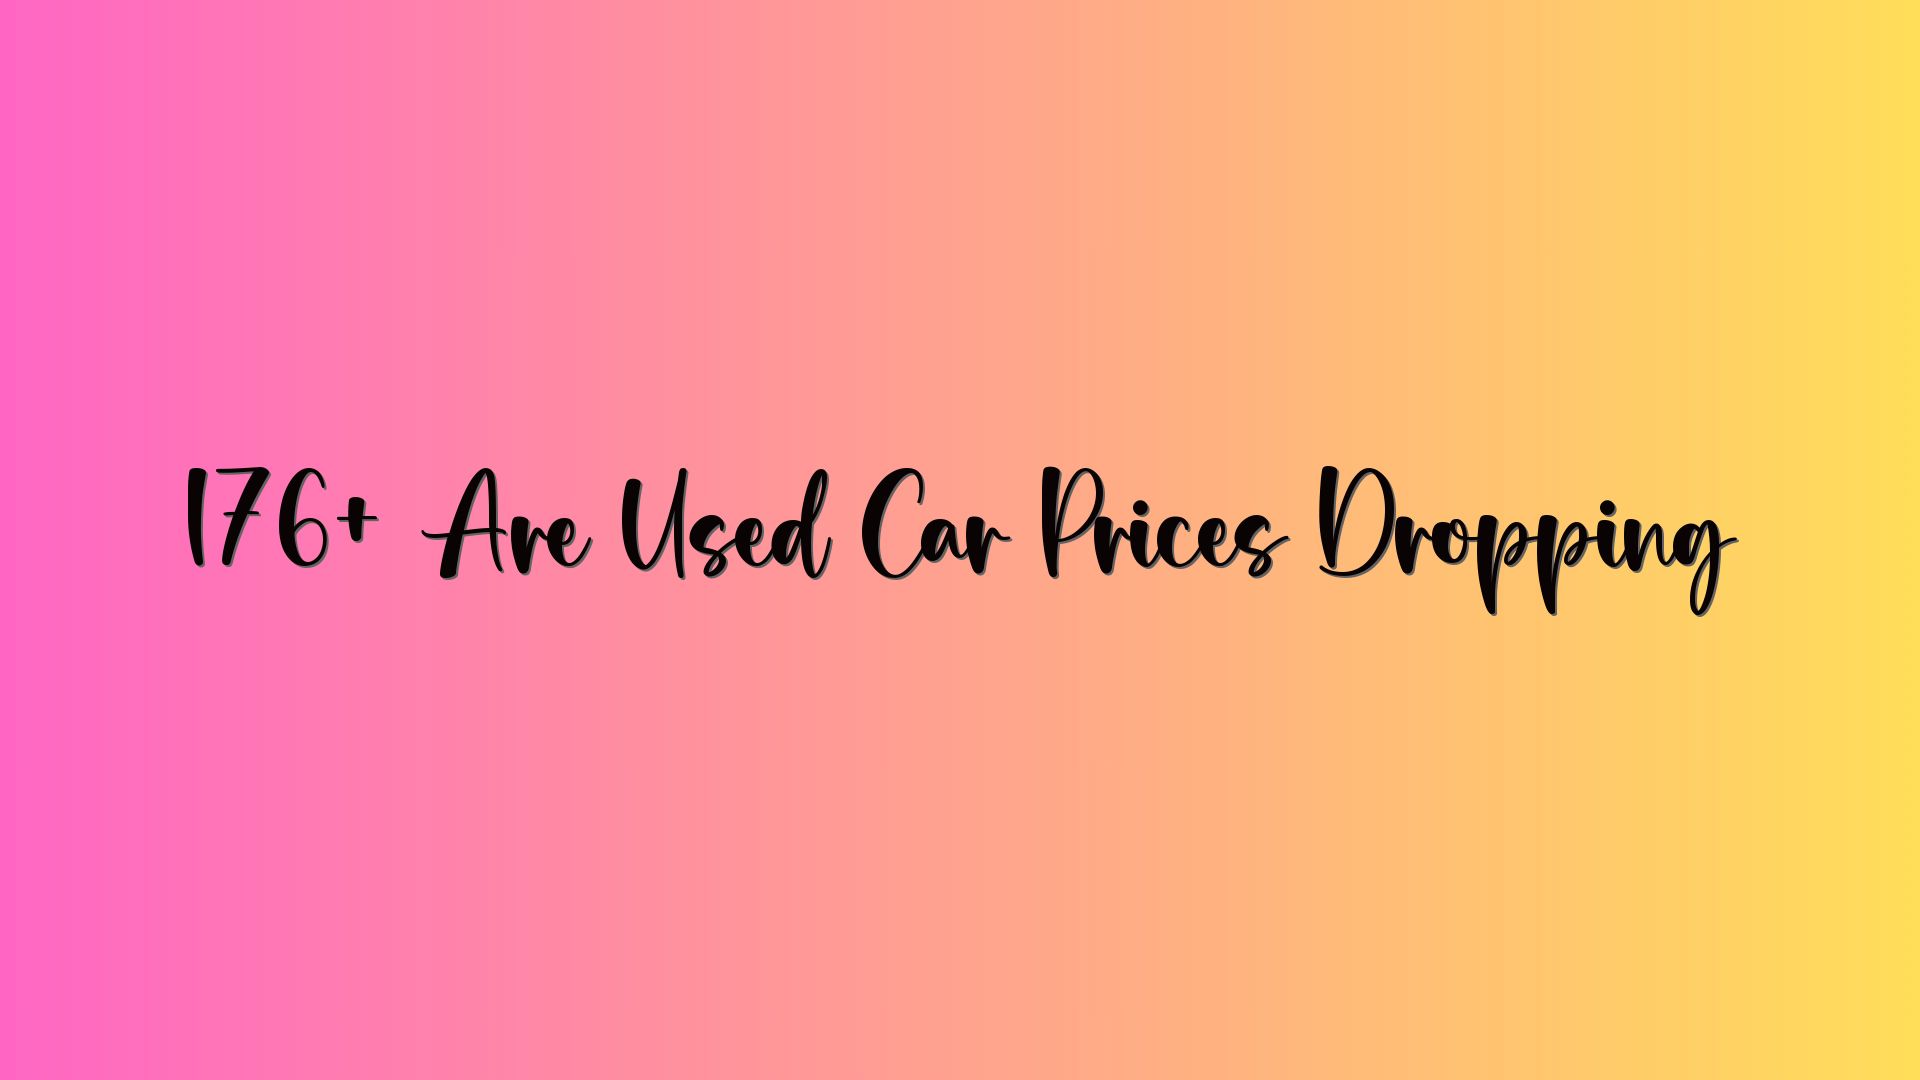 176+ Are Used Car Prices Dropping